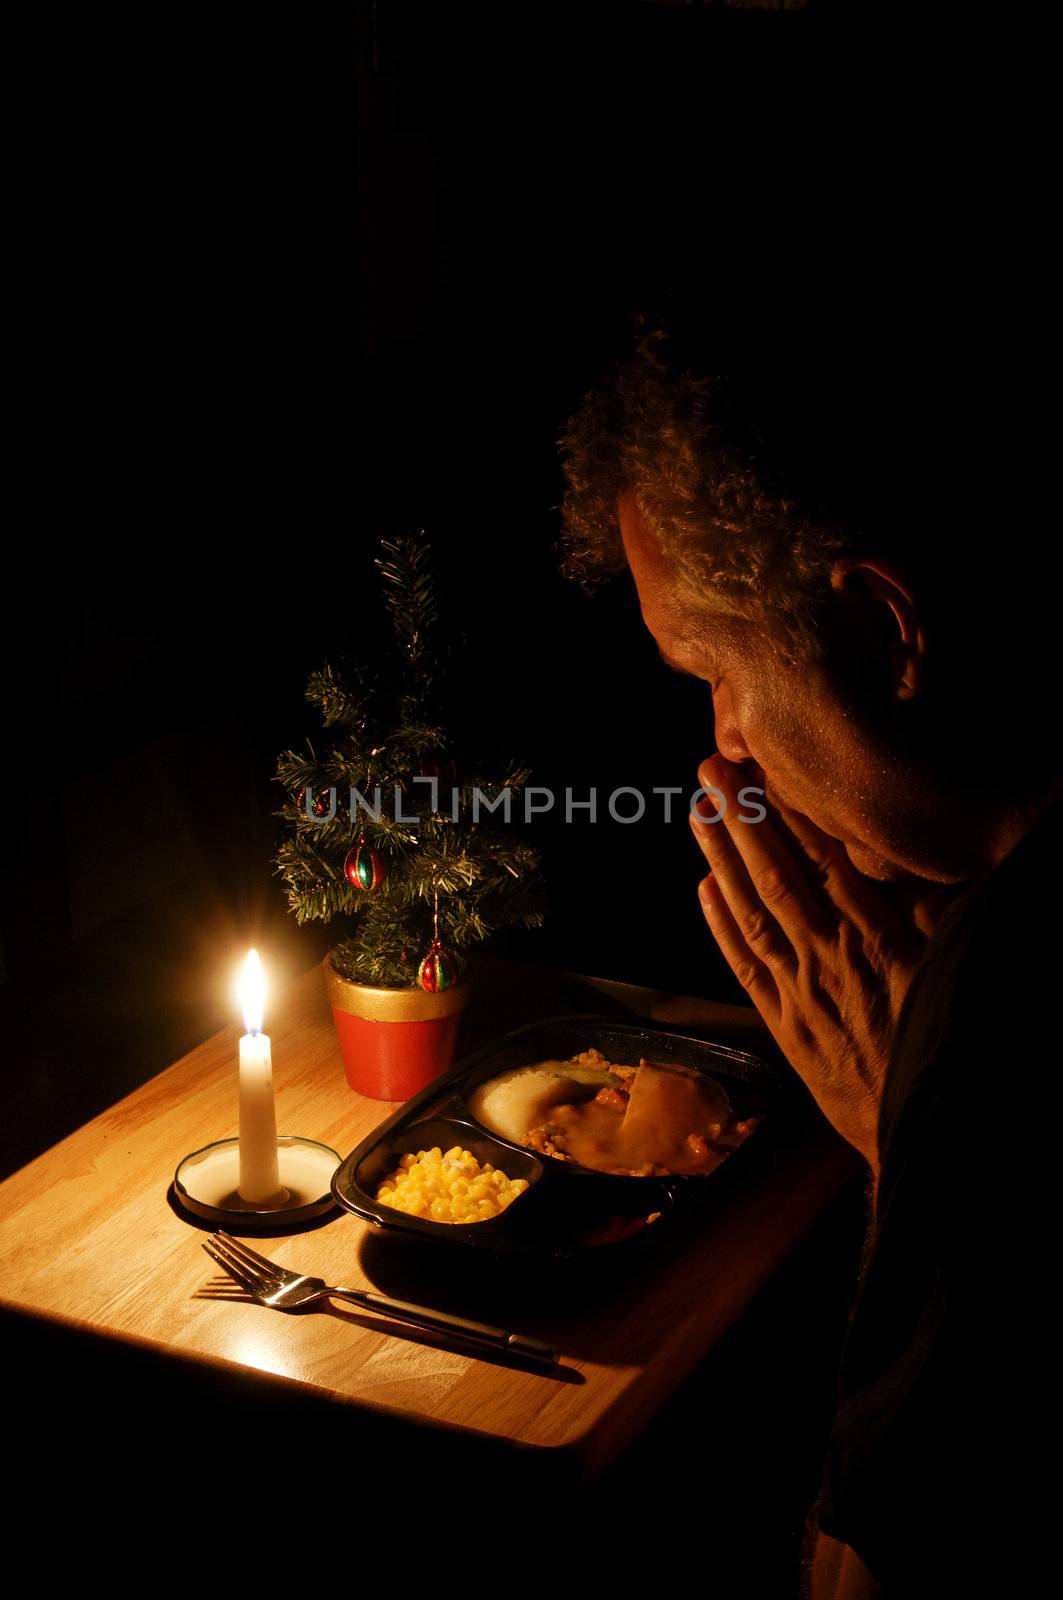 A lonely man praying over a TV dinner at Christmas.